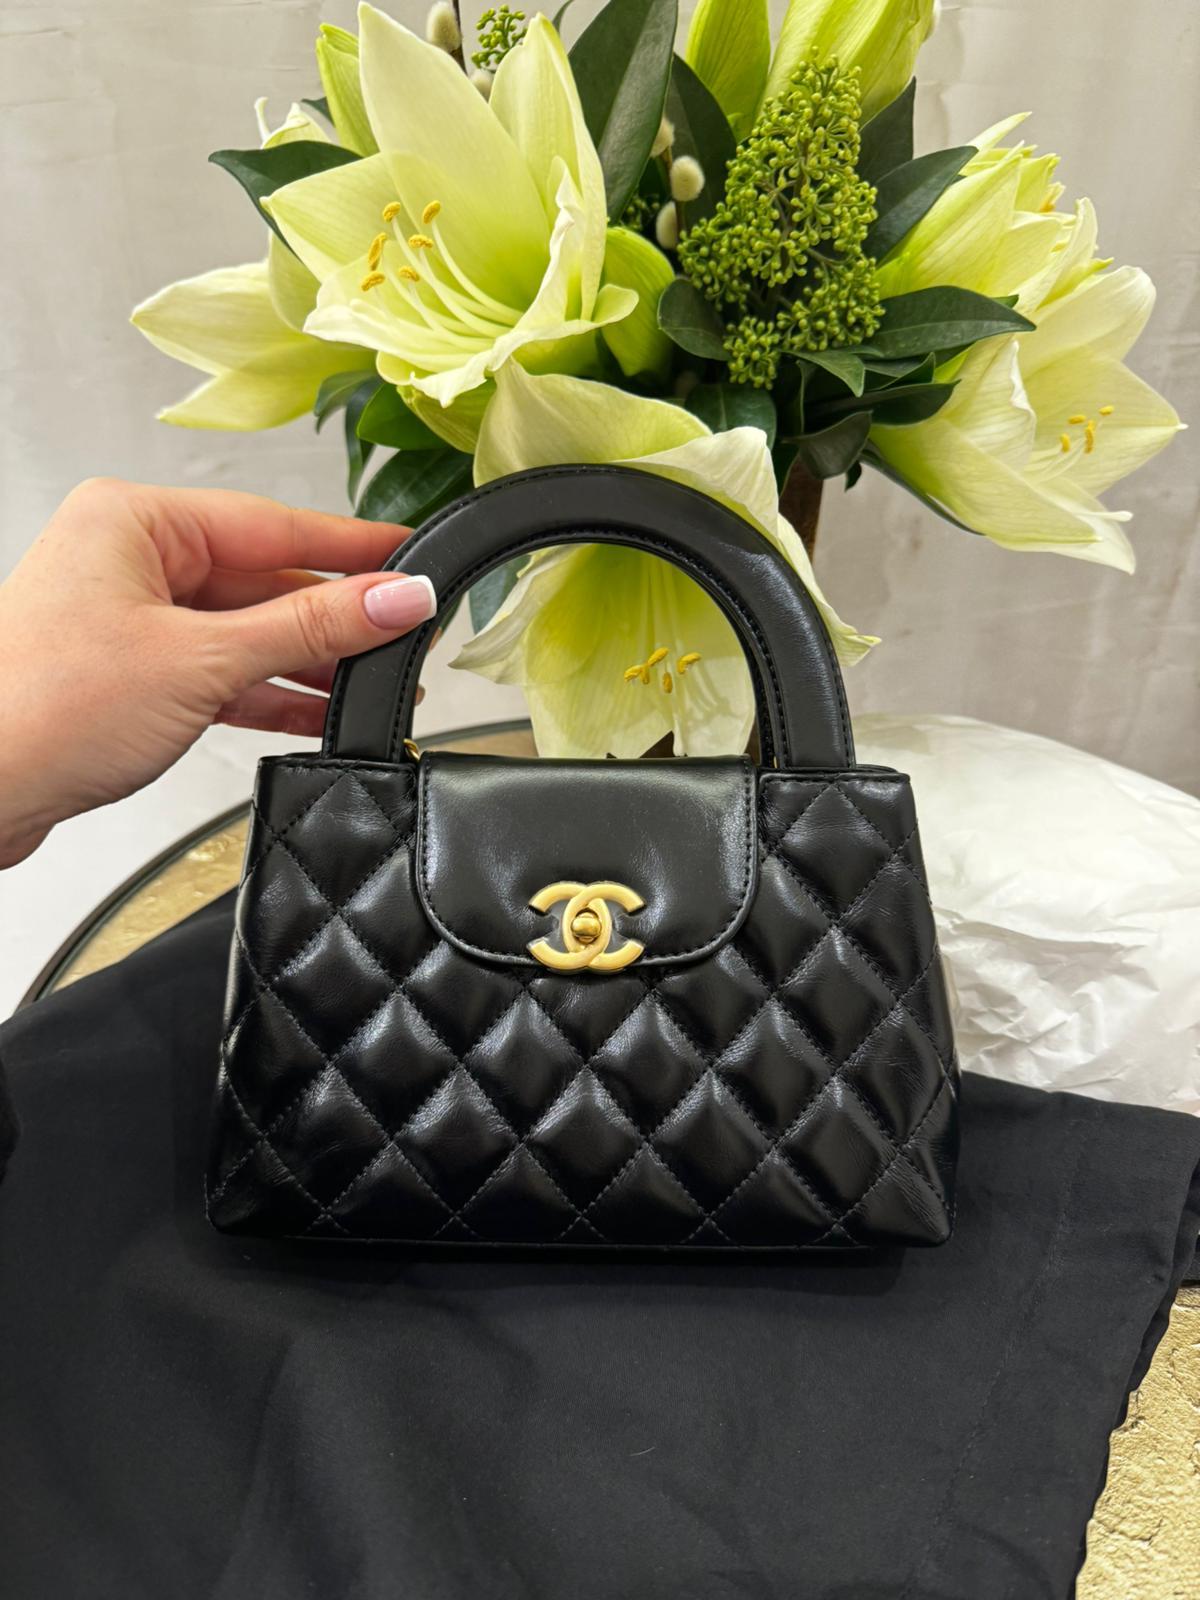 Chanel 23 MINI SHOPPING BAG black gold hardware. Very rare and popular!  Also known as the Chanel Kelly bag. This is one of the best bags made by Chanel, it looks like a mini Kelly but a more usable size. It can hold a lot of things, easily your